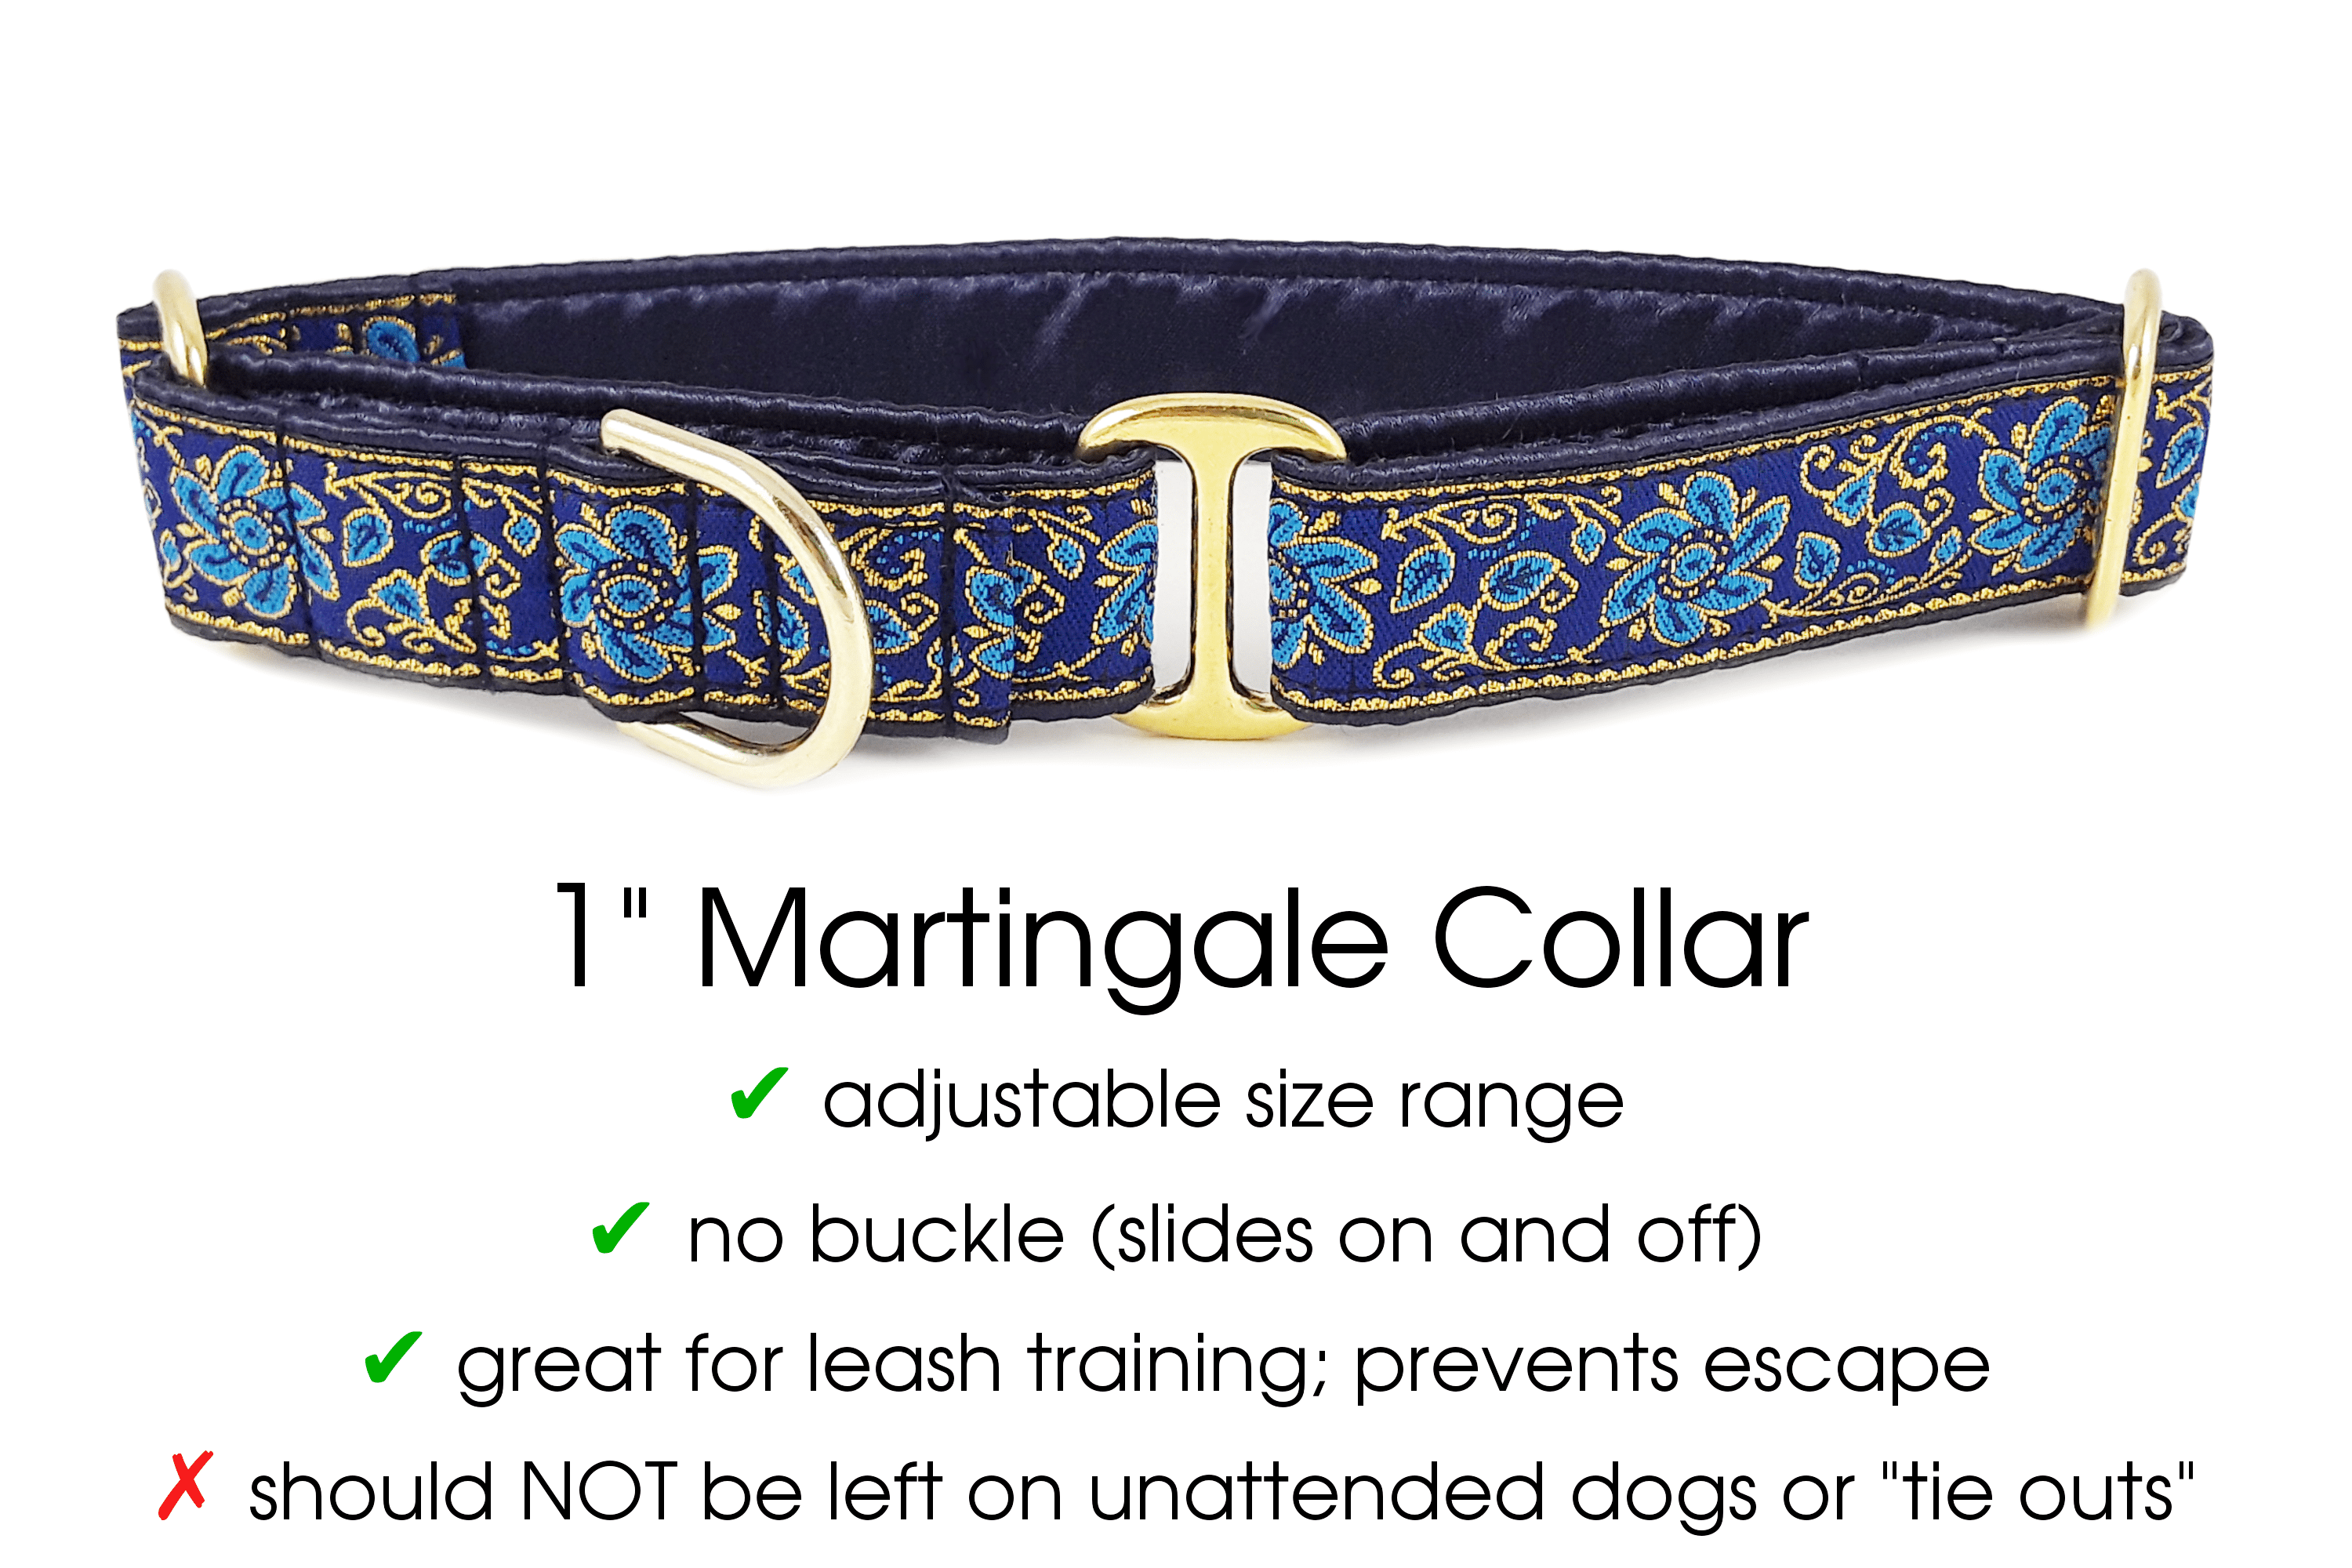 Sevilla Jacquard in Blue, Turquoise & Gold - Martingale Dog Collar or Buckle Dog Collar - 1" Width - The Hound Haberdashery